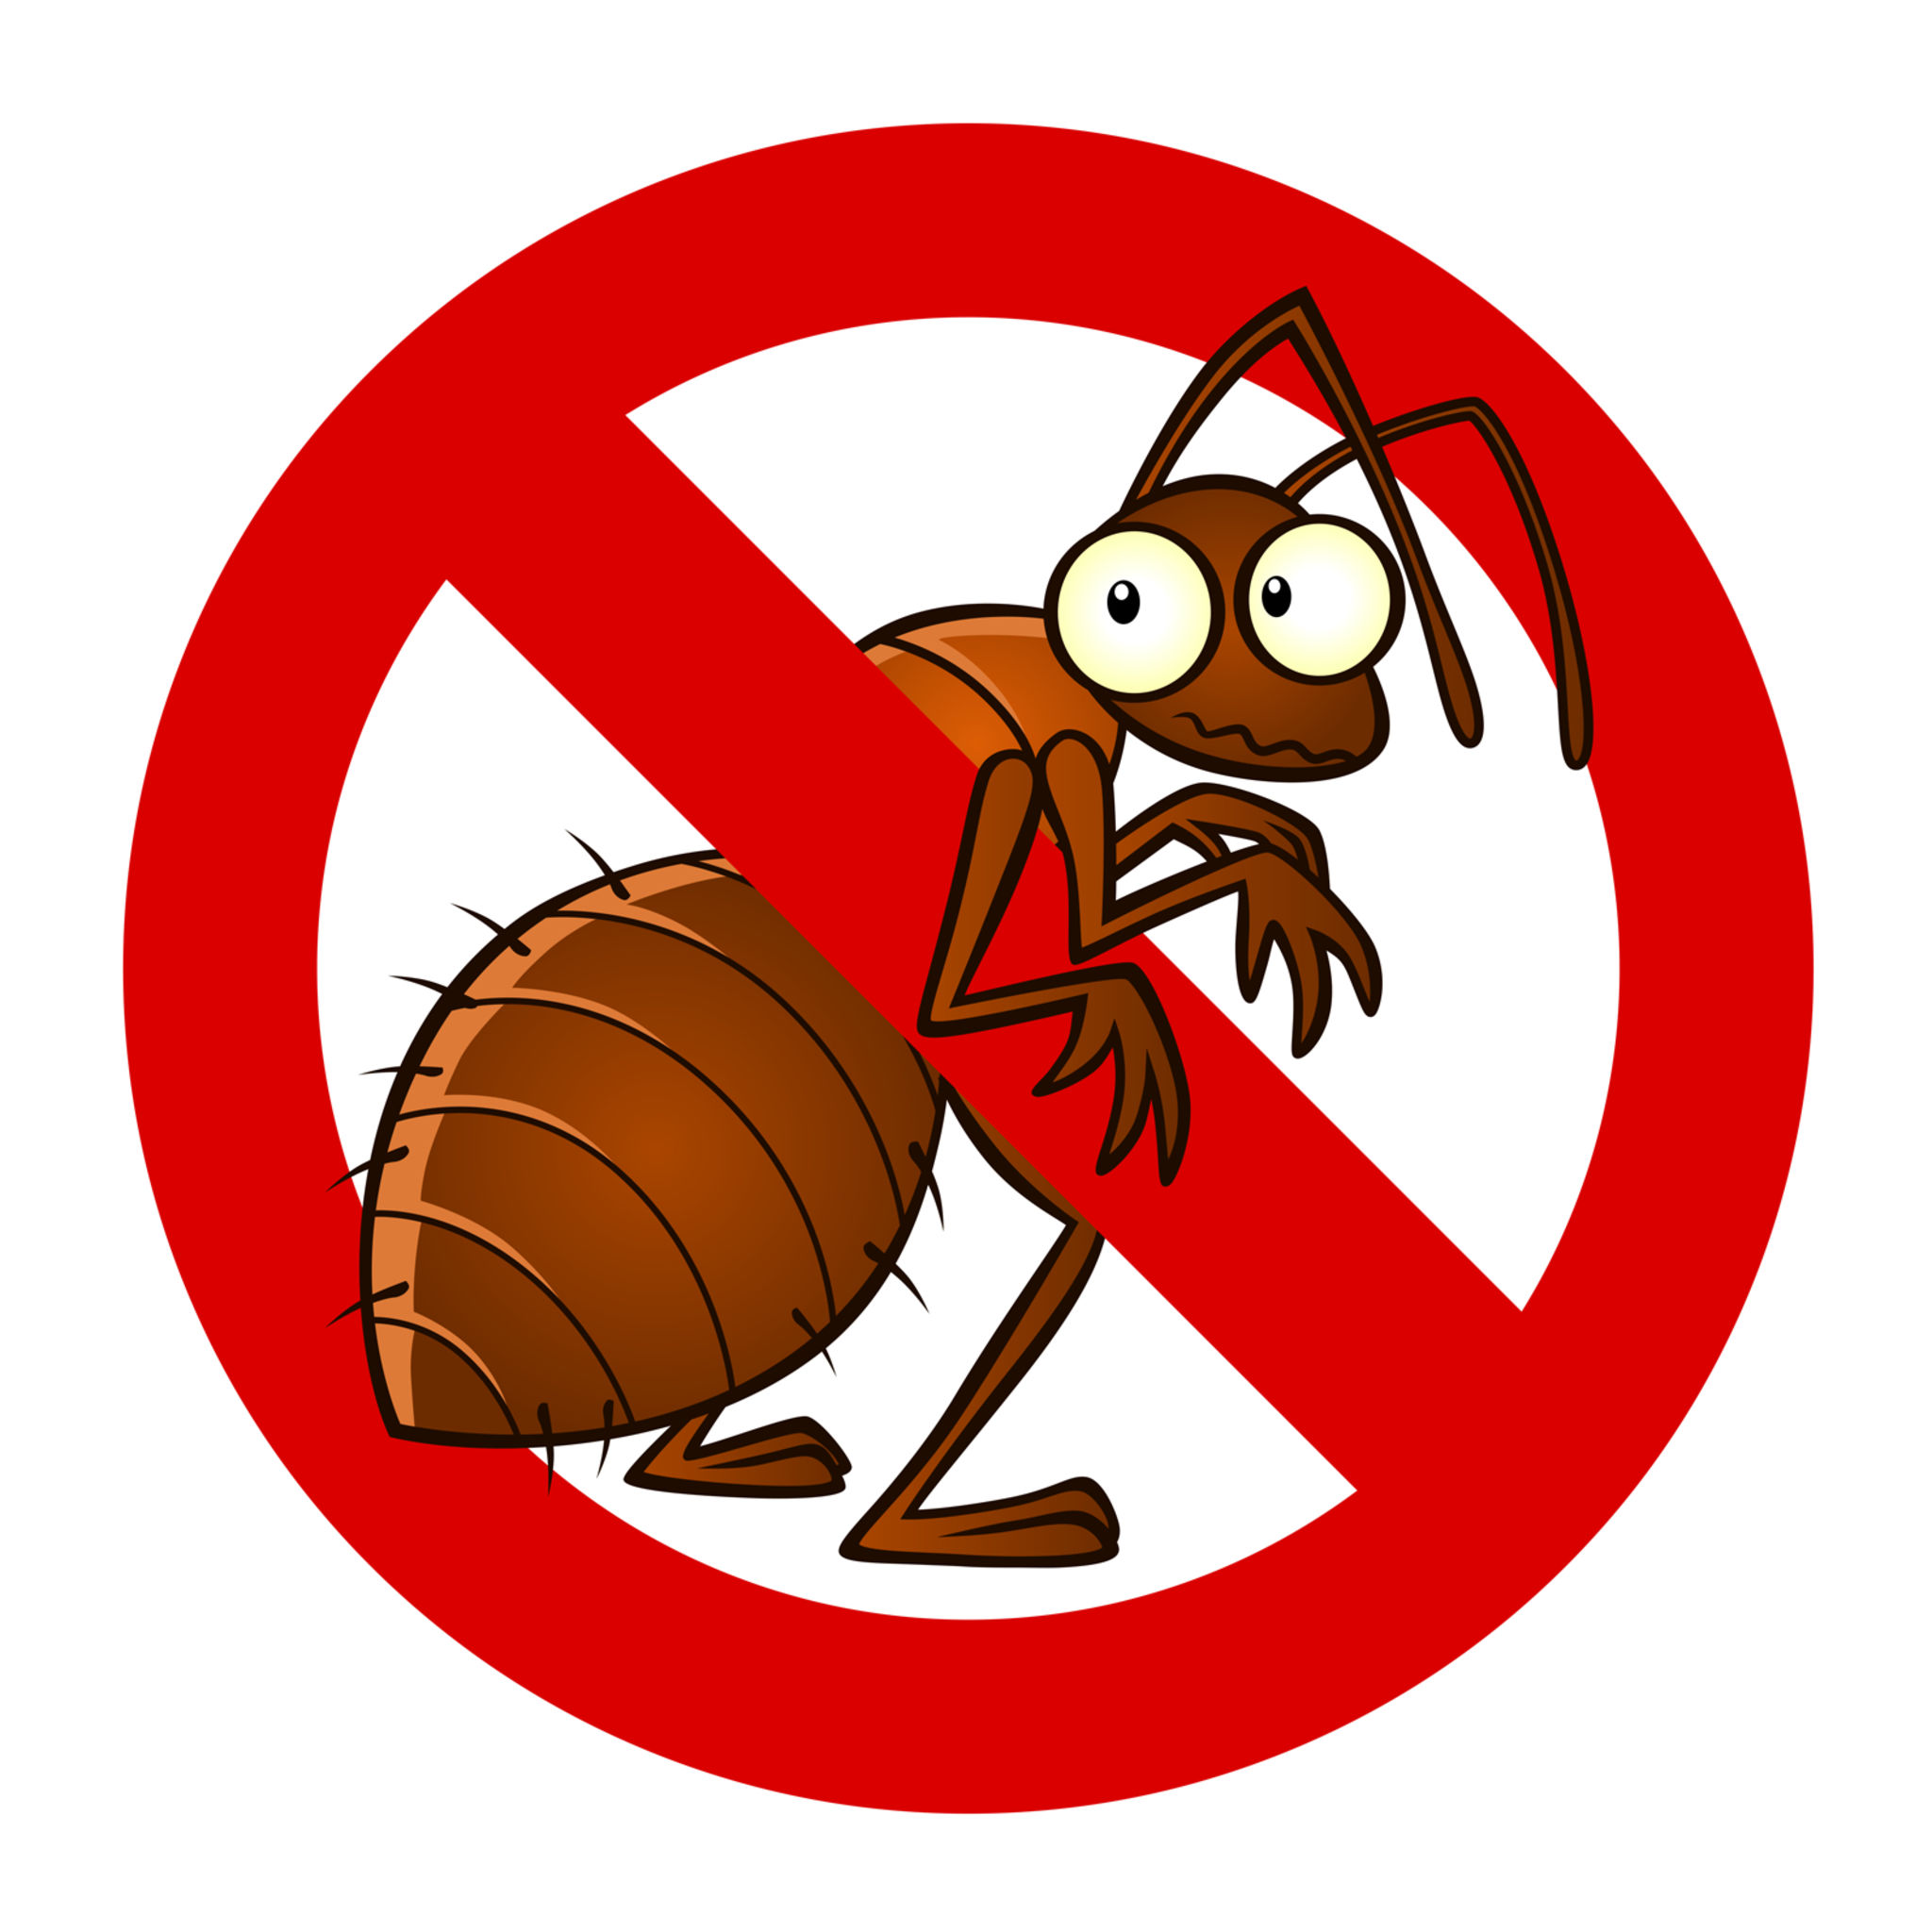 What is the most common method of pest control?